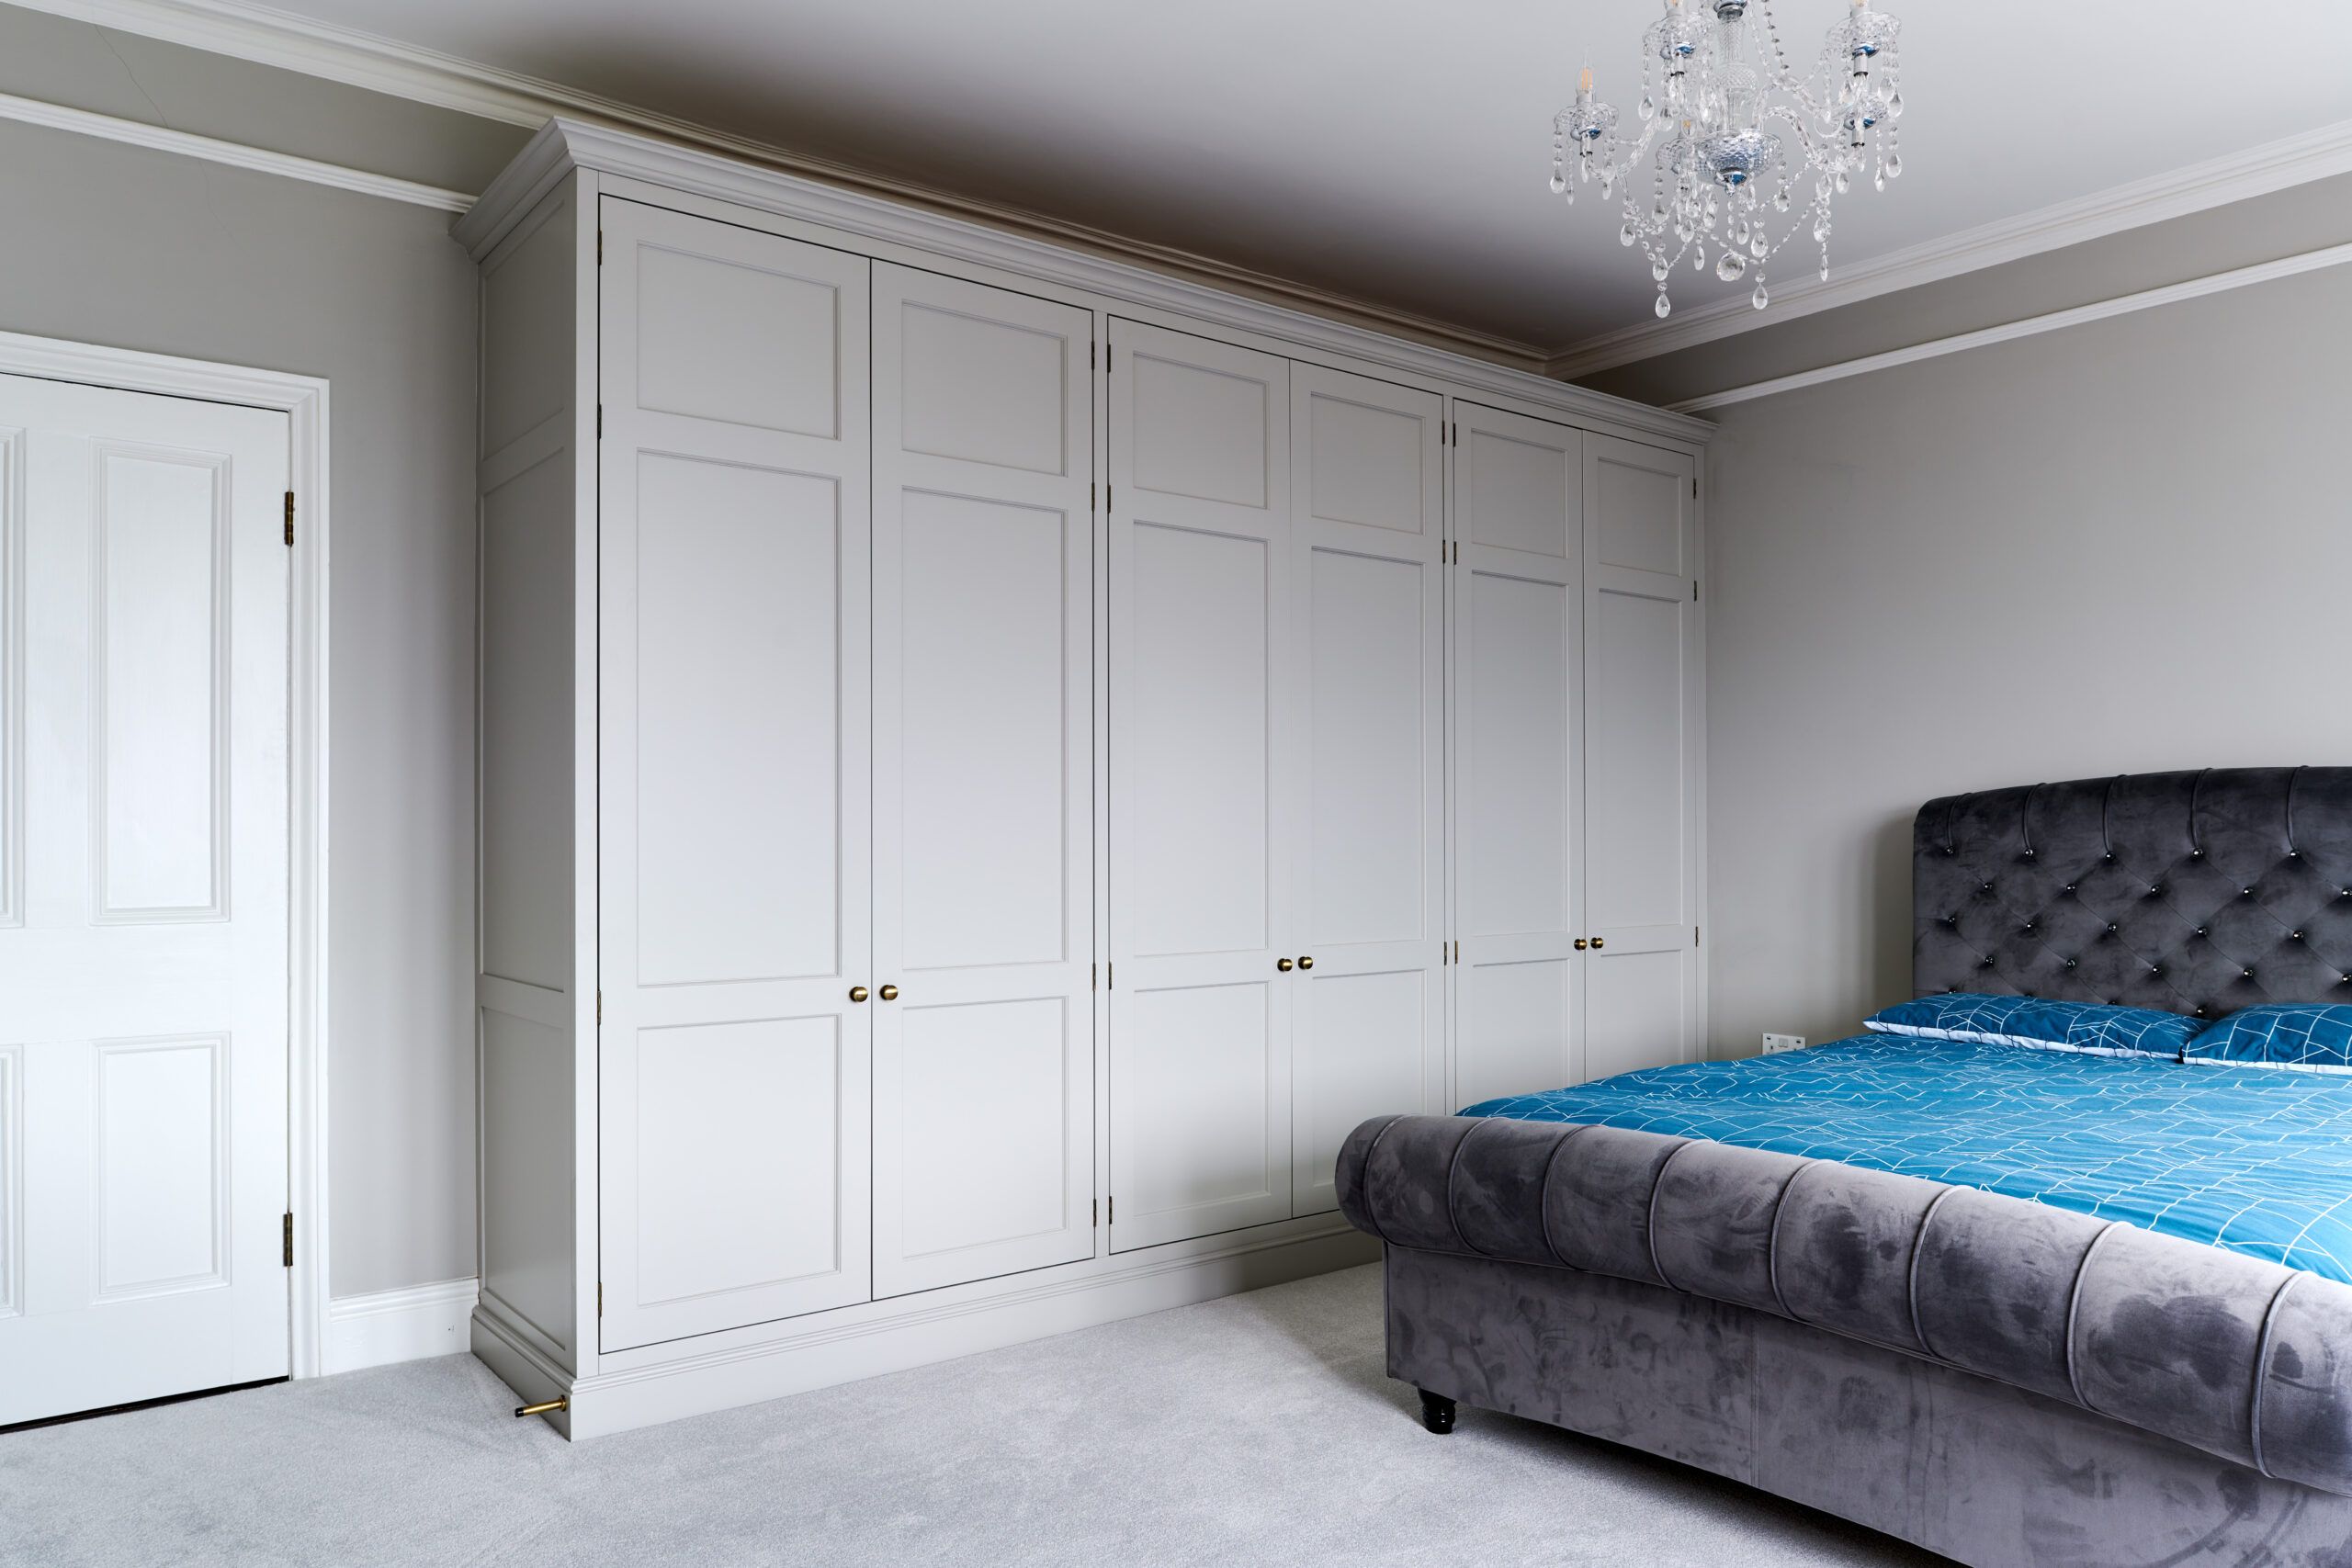 Fitted Or Freestanding Bespoke Wardrobes | Bath Bespoke Pertaining To French Style Fitted Wardrobes (View 9 of 15)